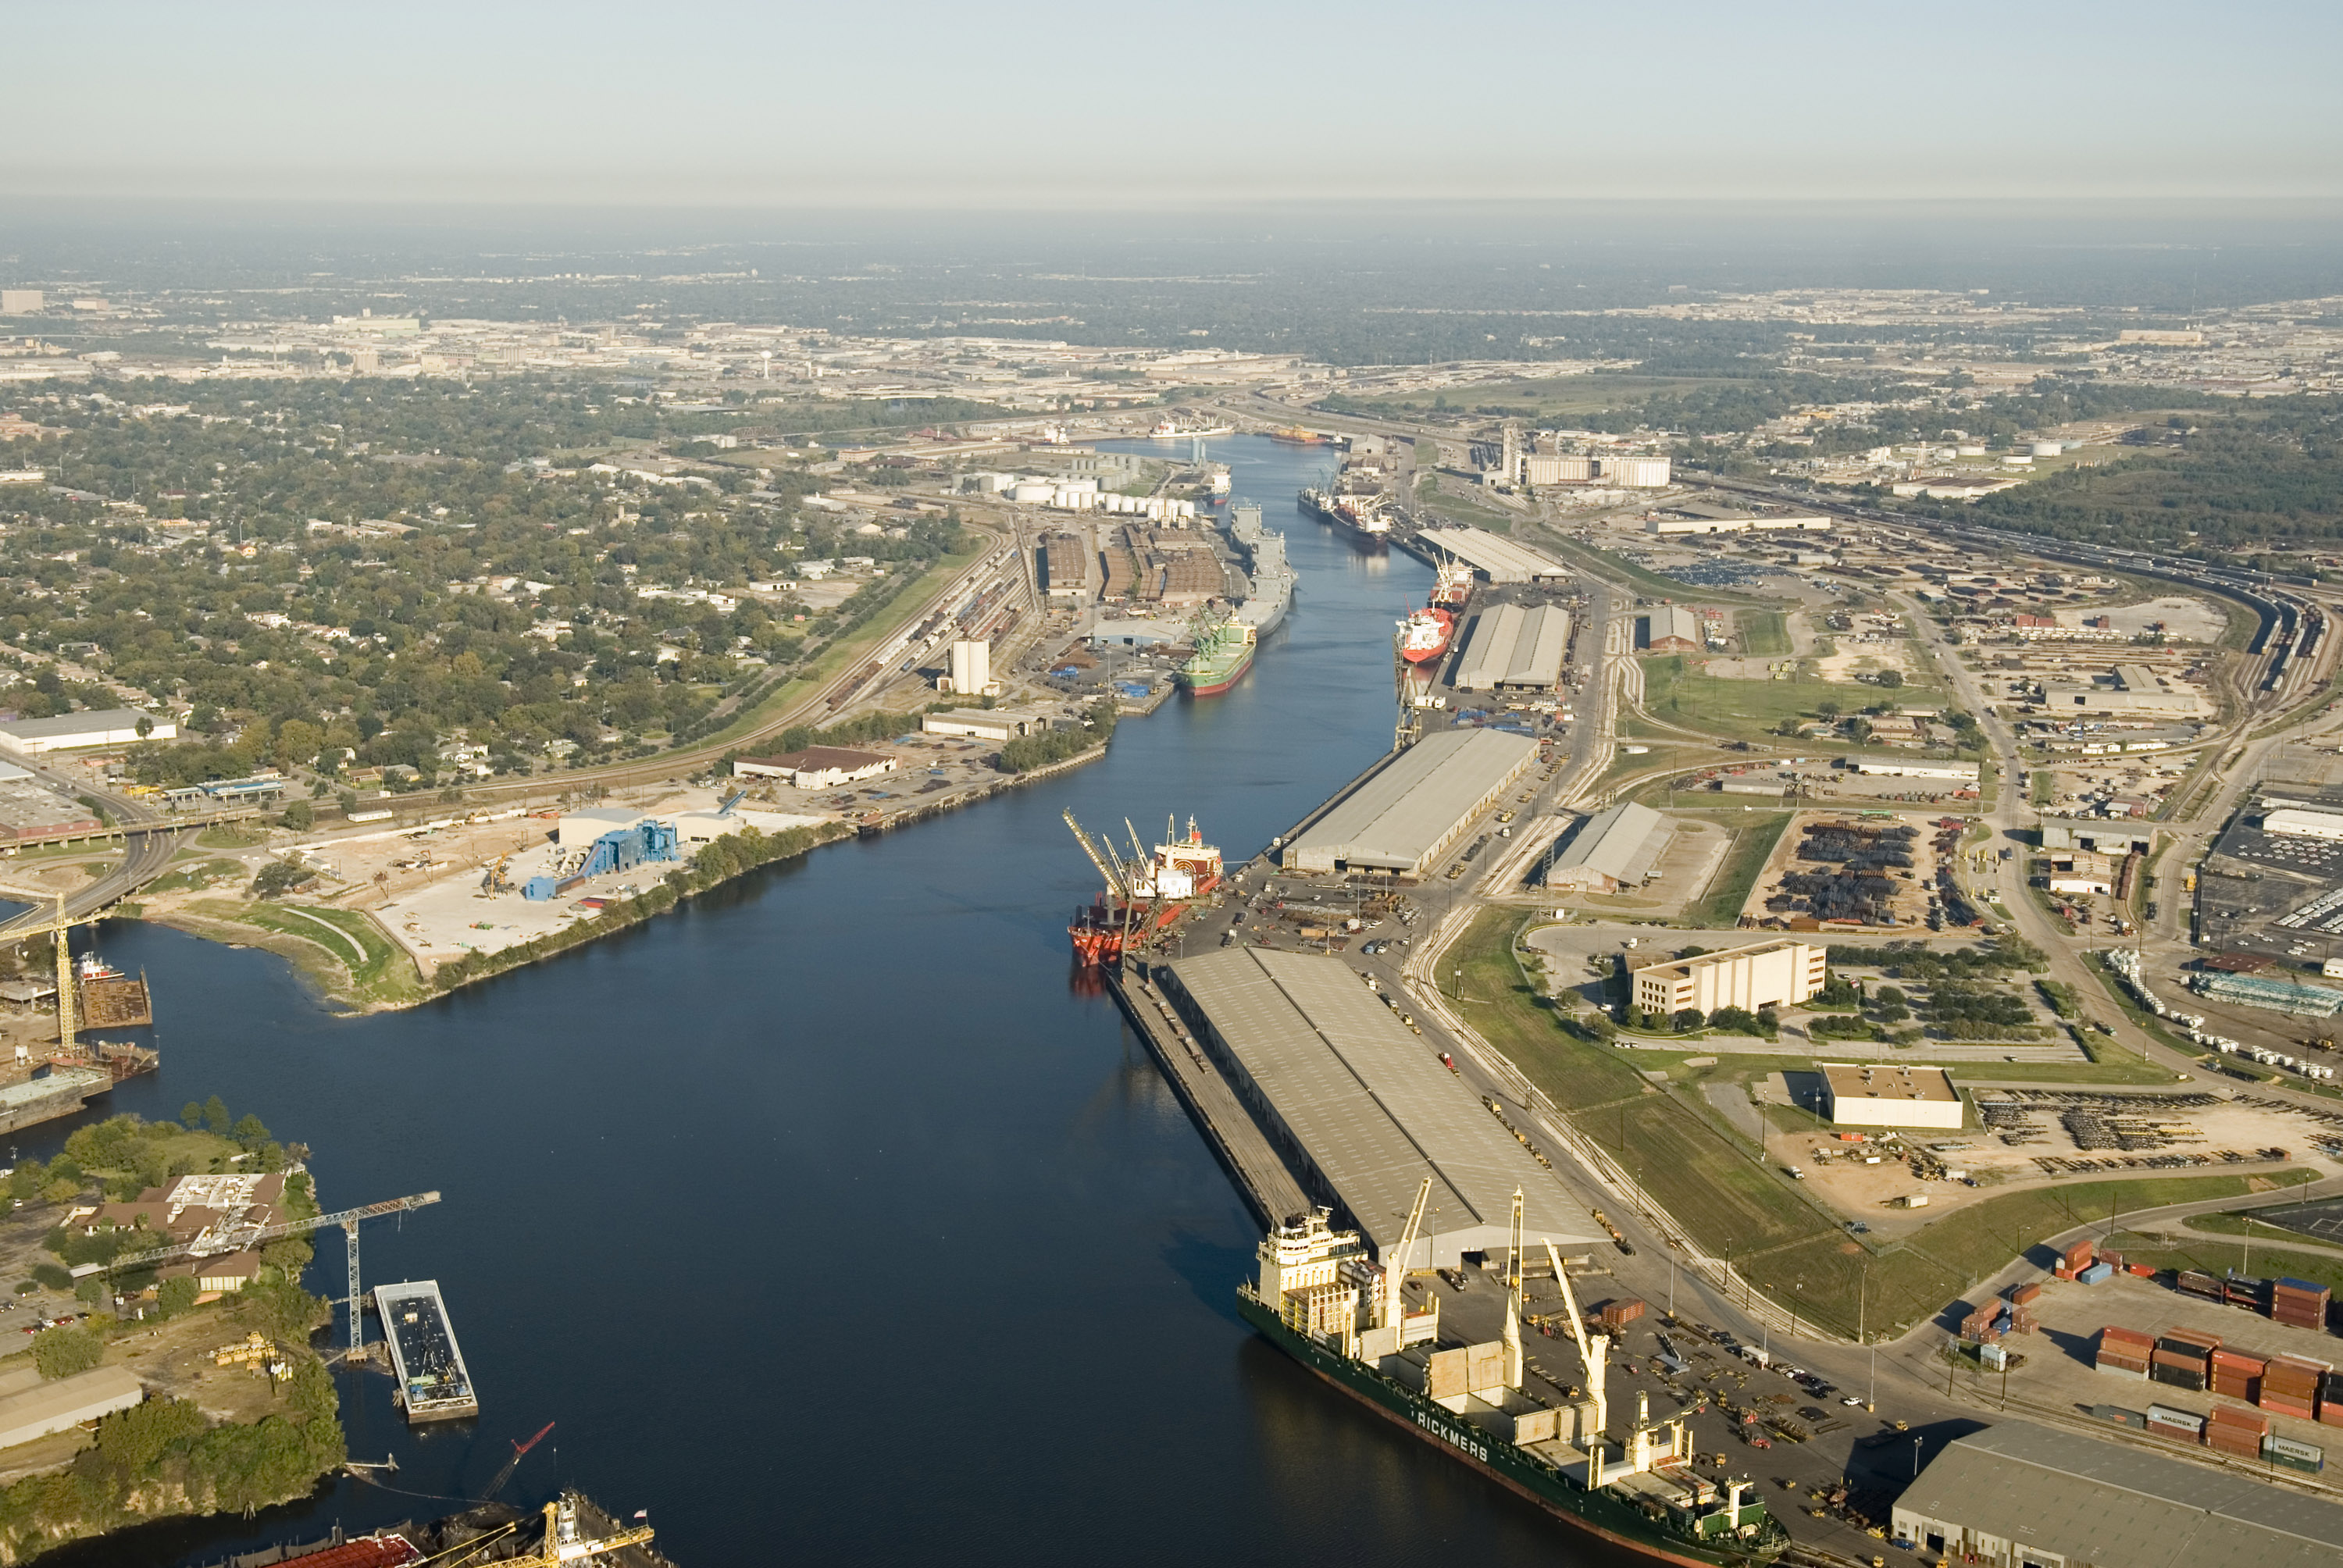 Houston Ship Channel Contributed More Than $900 Billion to U.S. Economy